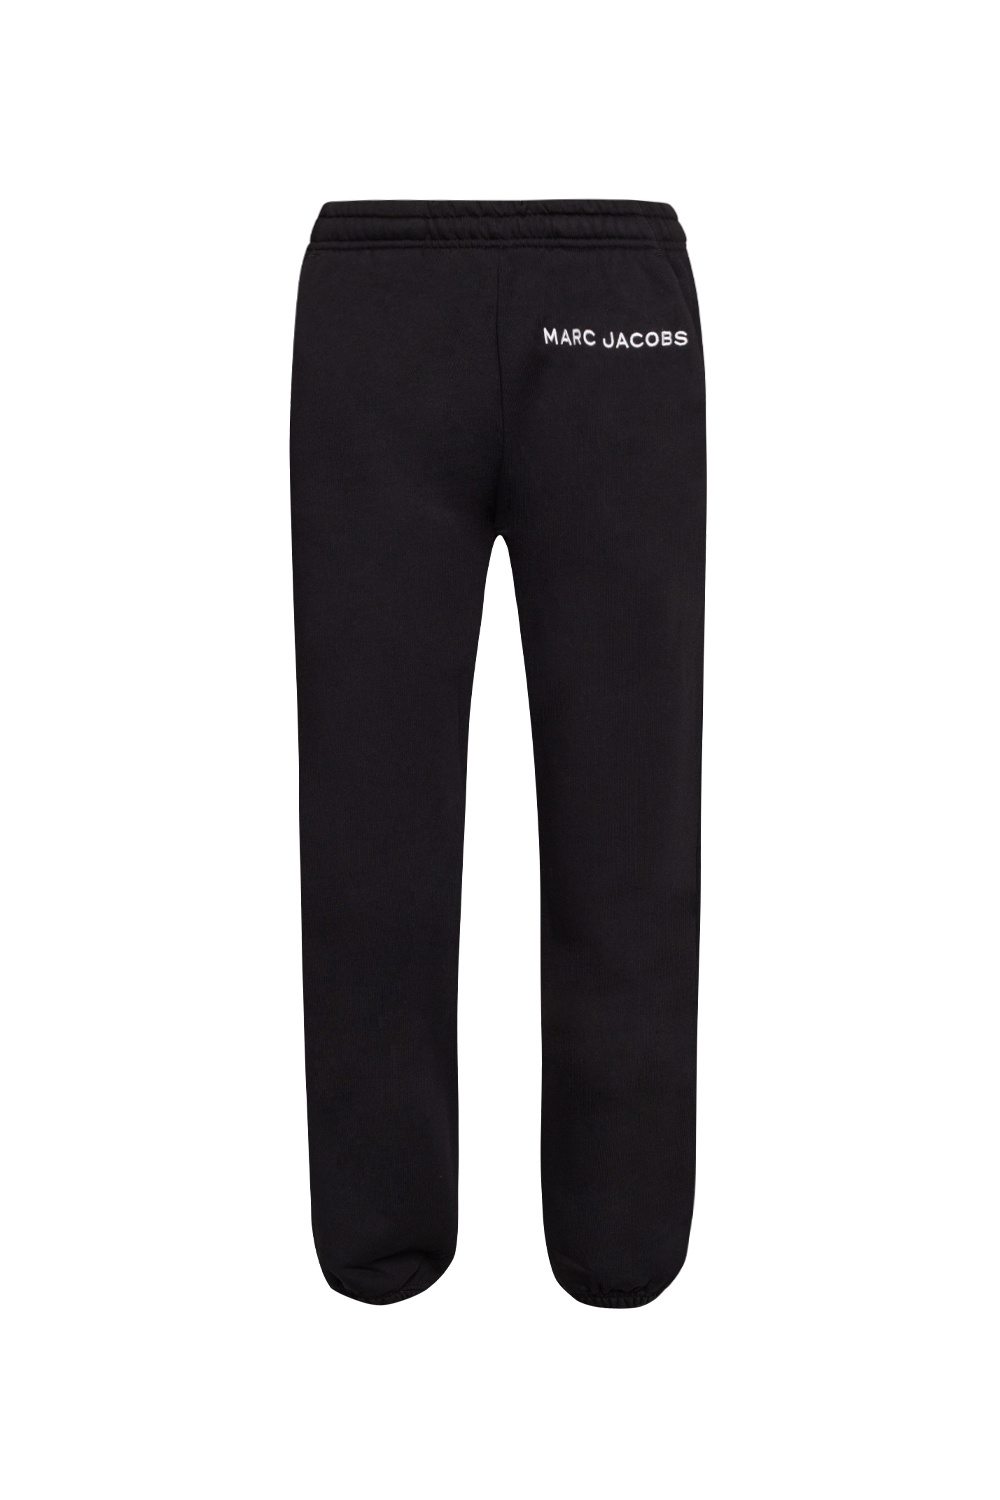 Marc Jacobs Sweatpants with logo